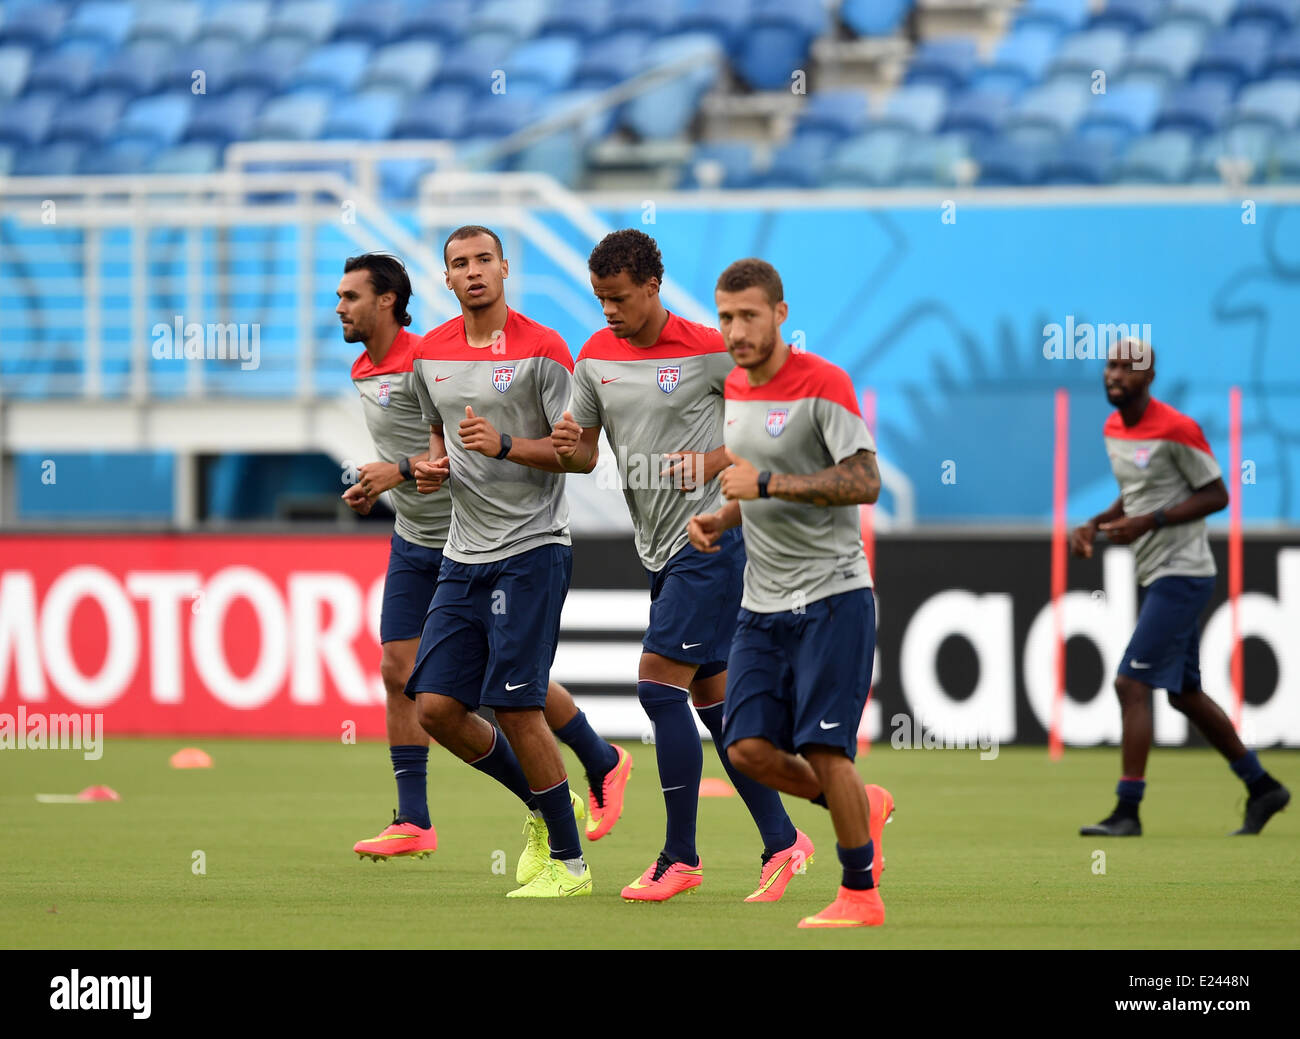 Natal, Brazil. 15th June, 2014. Chris Wondolowski (L-R), John Brooks, Timothy Chandler and Fabian Johnson in action during a training session of USA's national soccer team at the Arena das Dunas Stadium in Natal, Brazil, 15 June 2014. Ghana will face USA in their group G preliminary round match at the FIFA World Cup 2014 on 16 June 2014 in Natal. Photo: Marius Becker/dpa/Alamy Live News Stock Photo